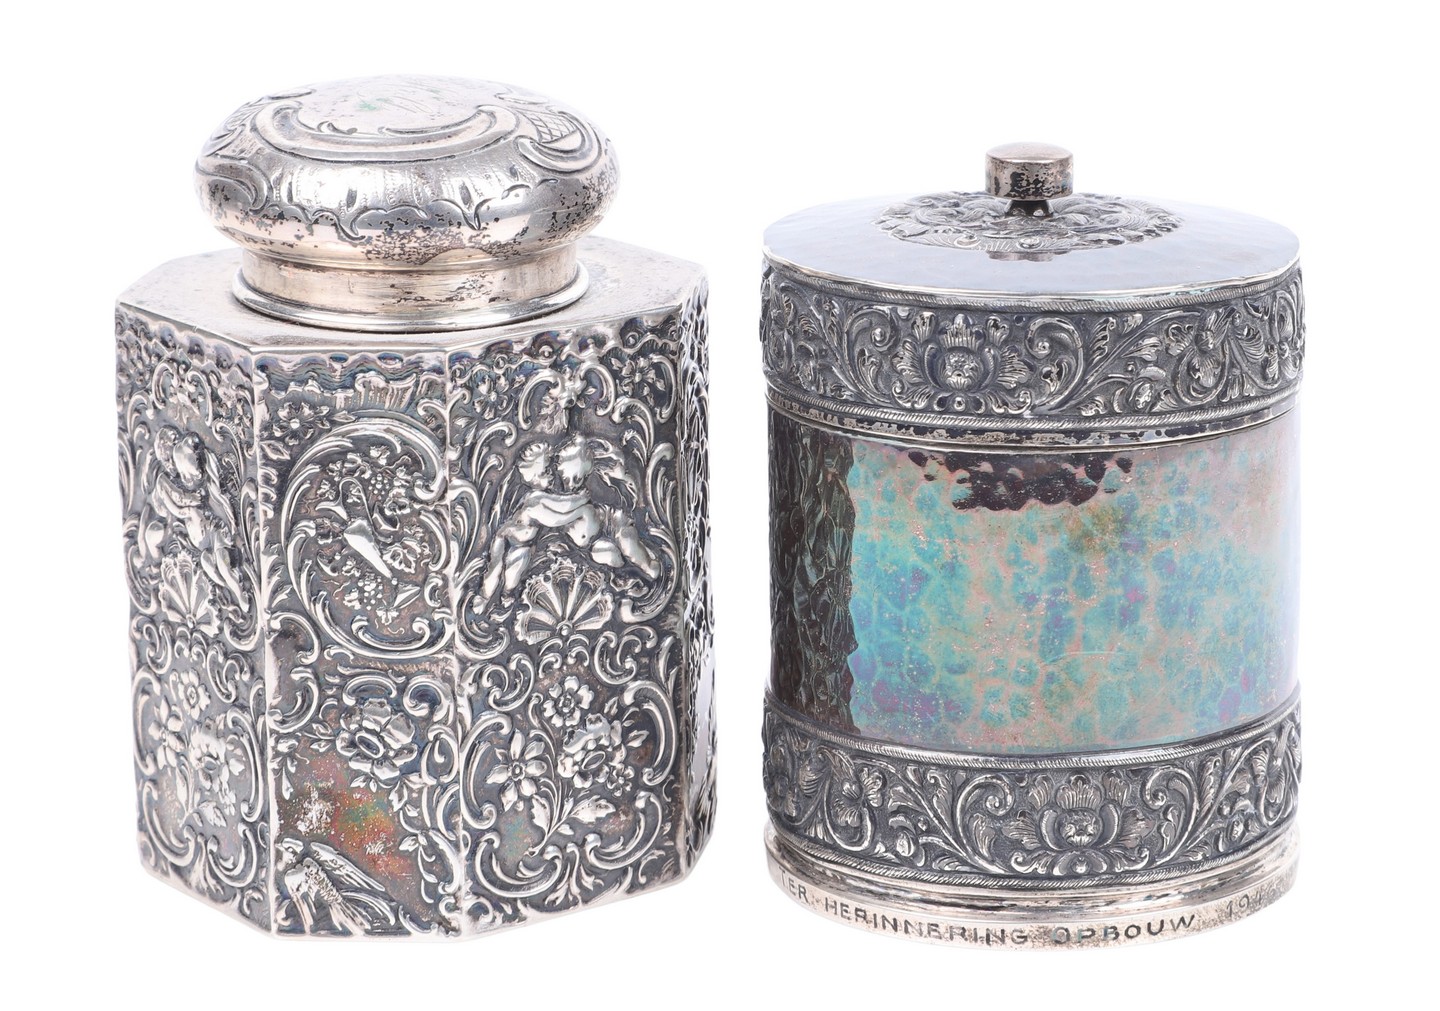 German silver tea caddy and covered 317e6f